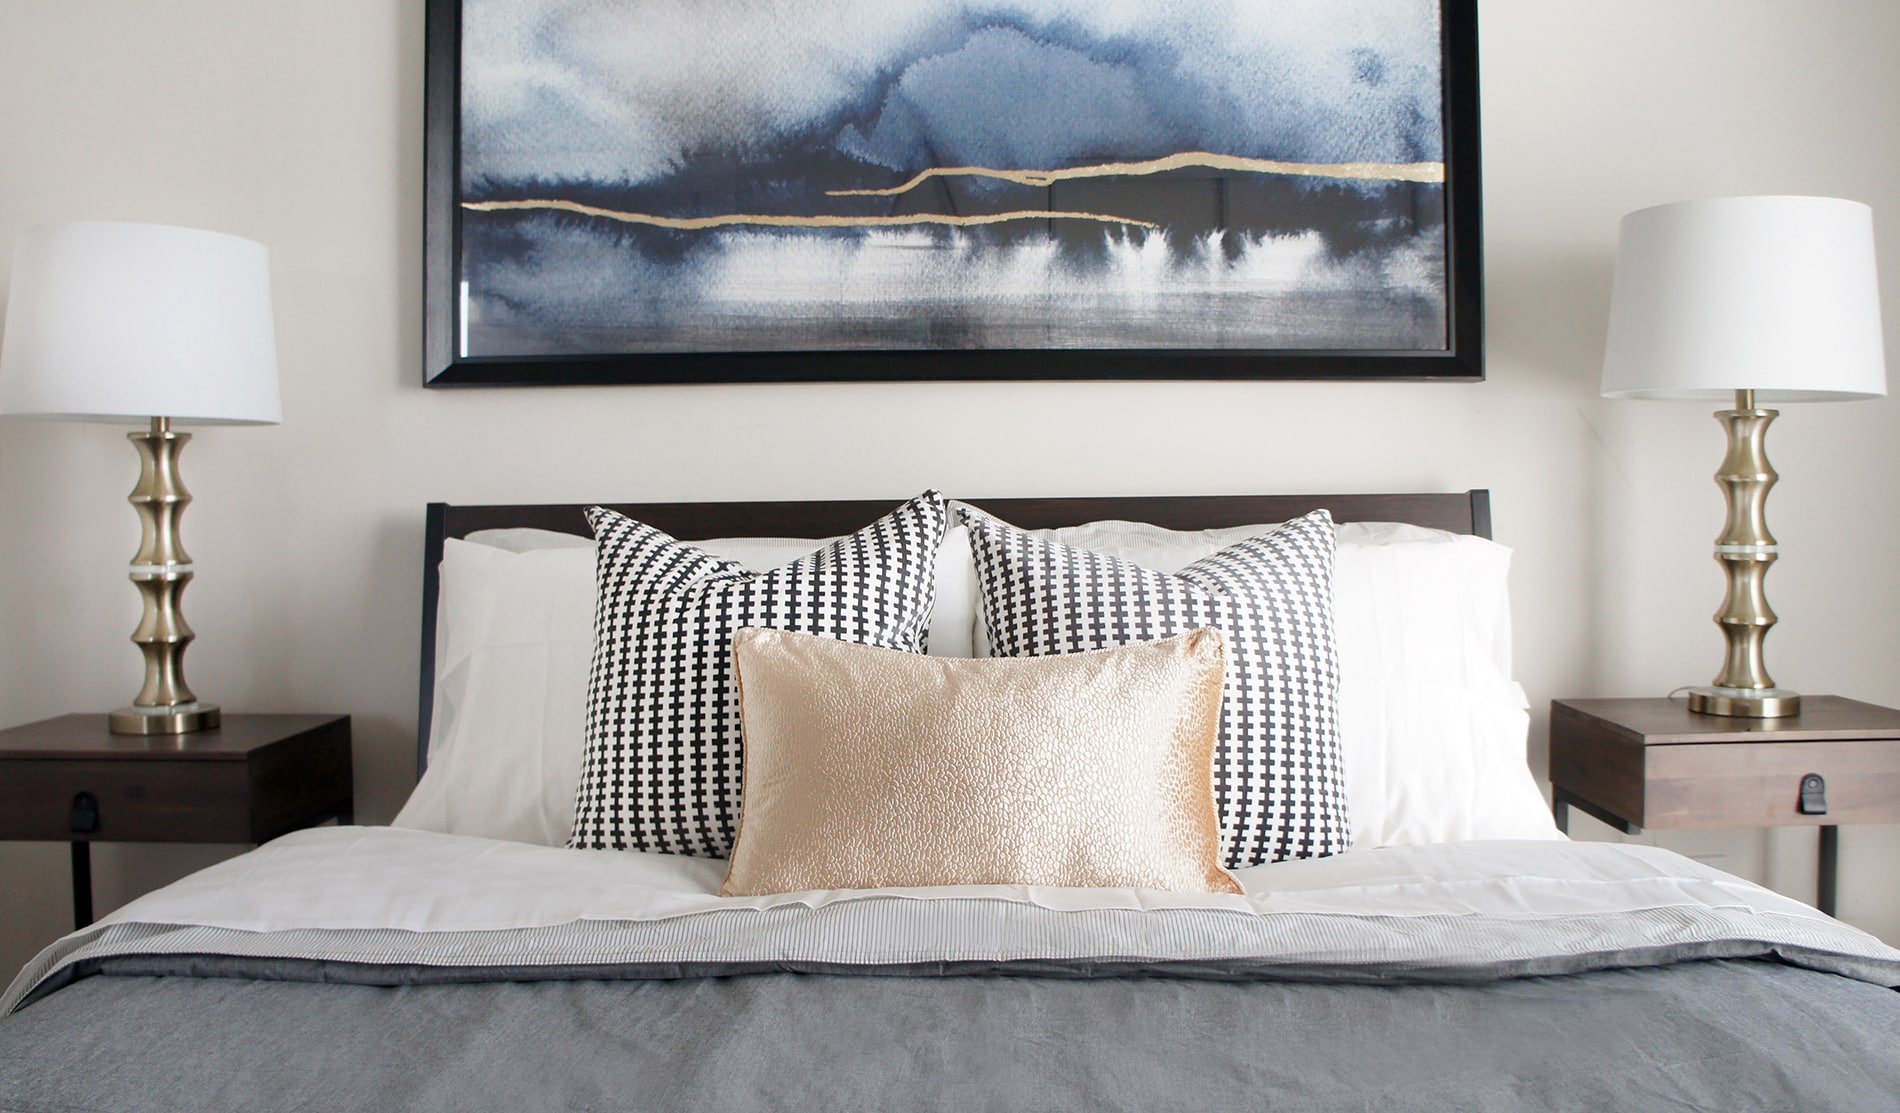 A piece of wall art featuring blue and gold added visual interest and height over the headboard in one of the condo bedroom designs